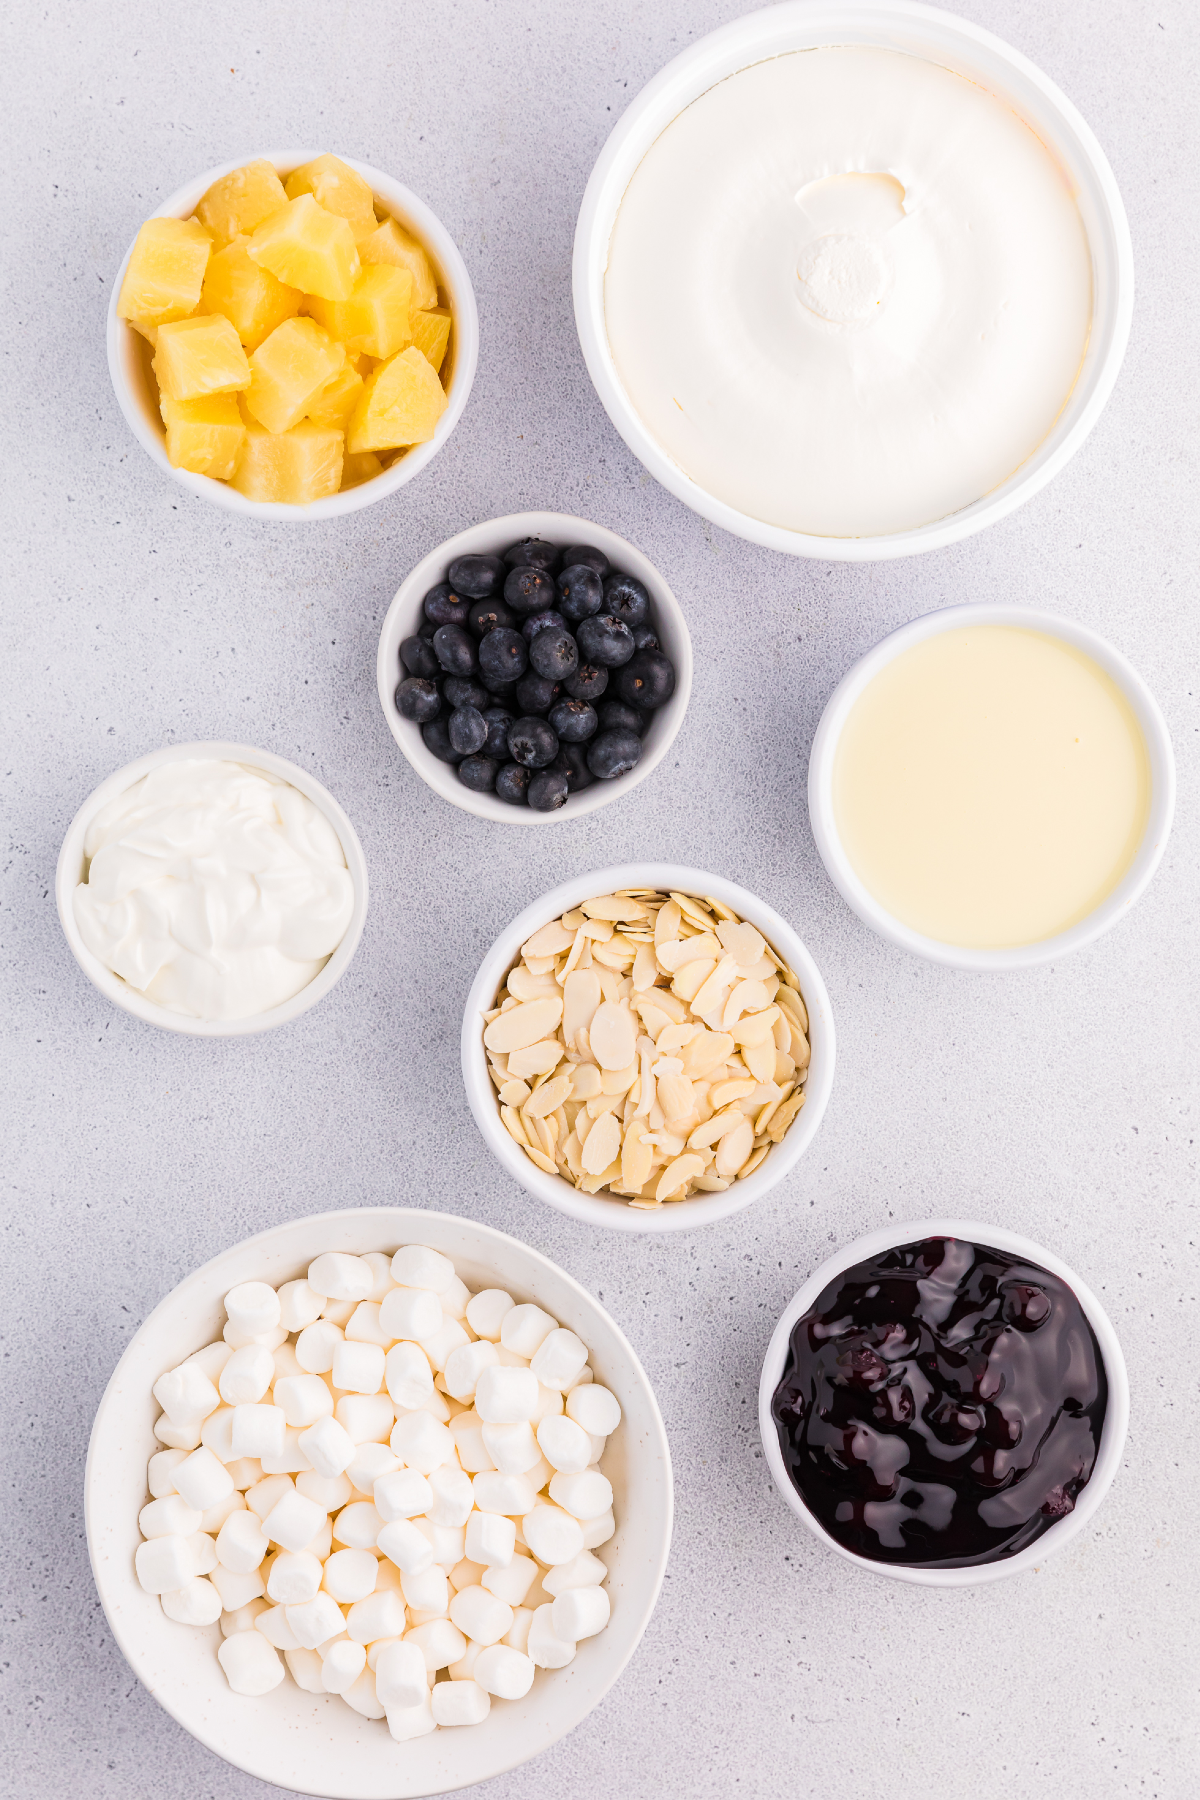 Ingredients for Blueberry Fluff Salad: pineapple, Cool Whip, blueberries, almonds, mini marshmallows, pie filling, sweetened condensed milk and sour cream